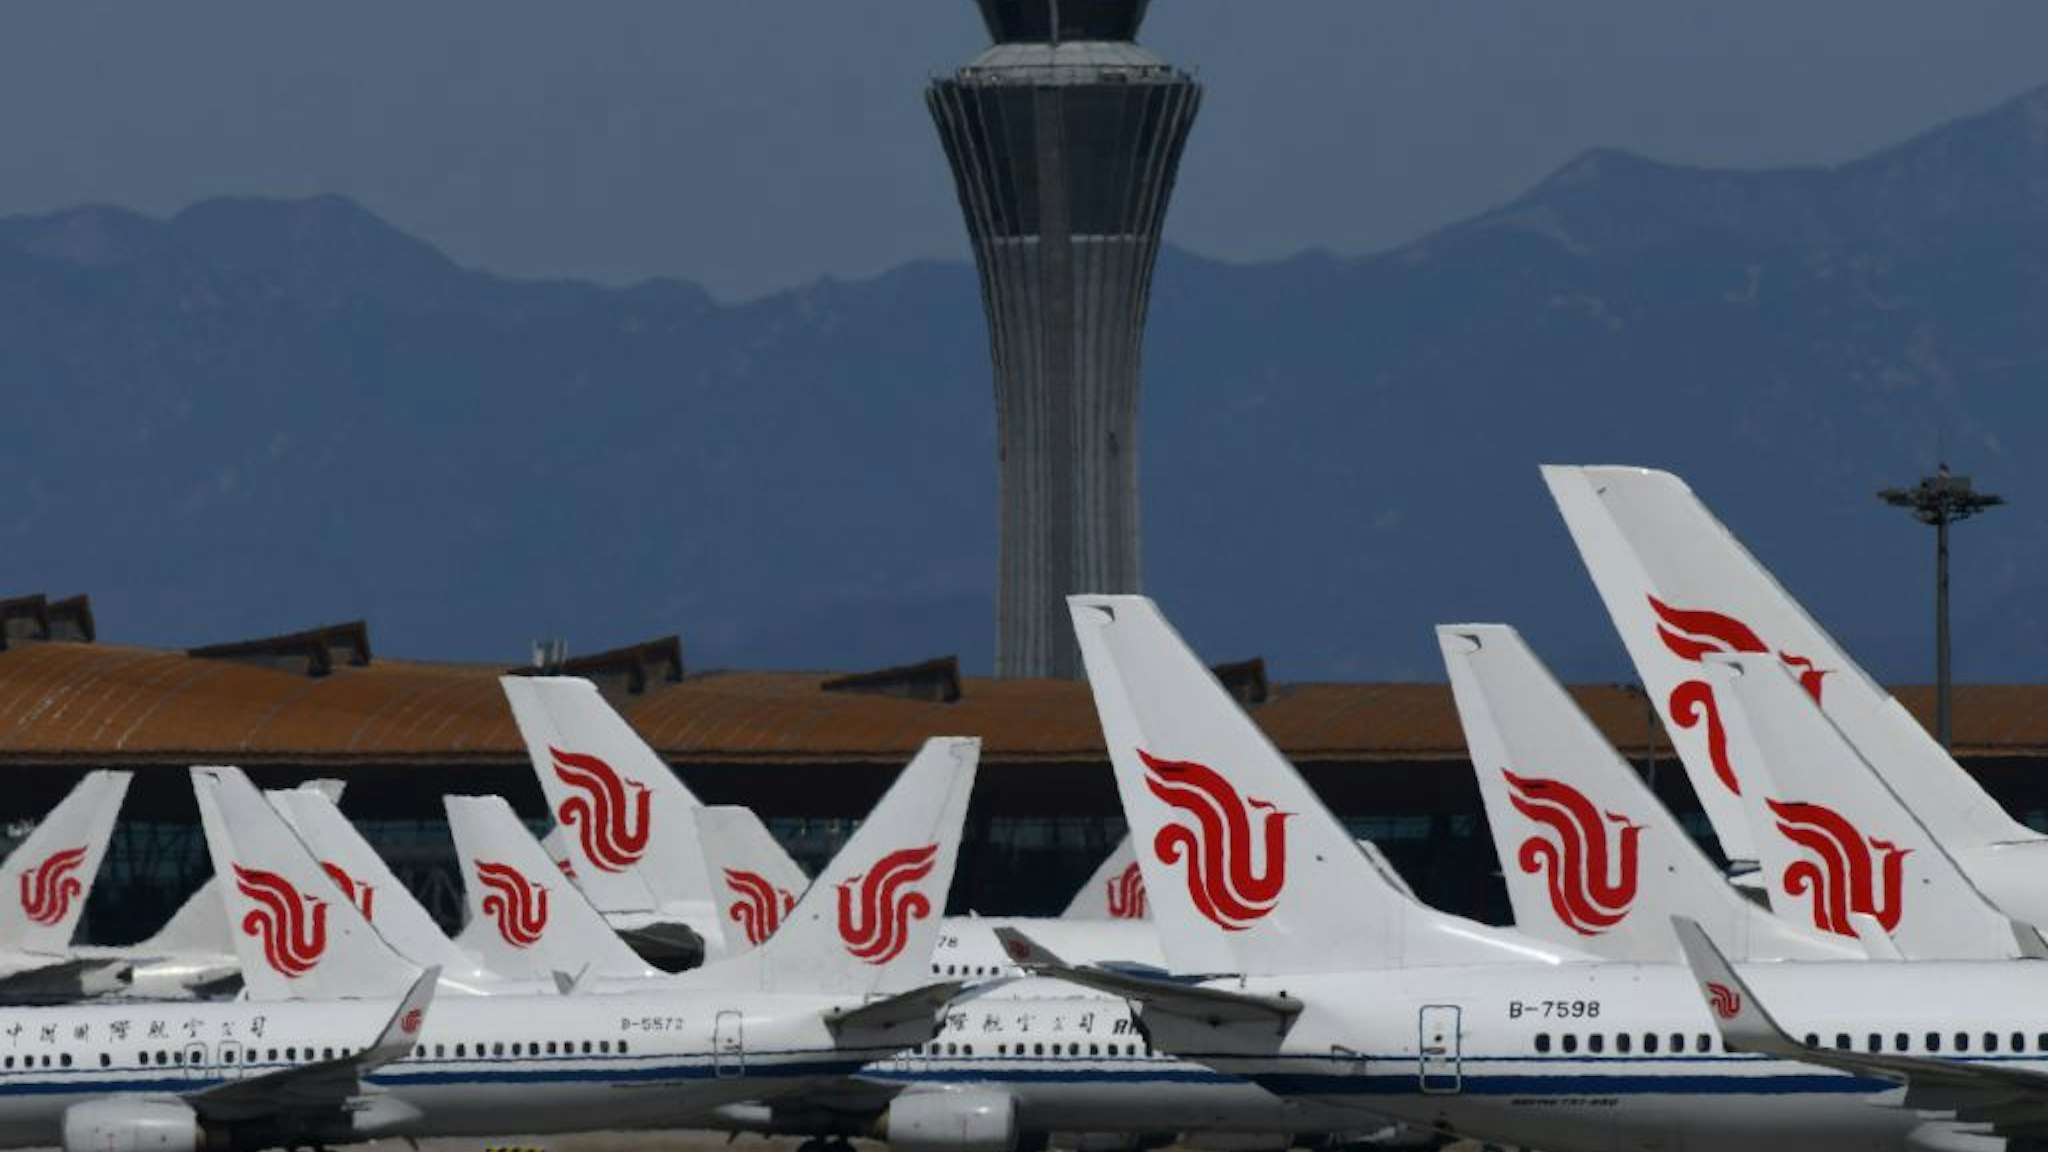 Air China planes are seen parked on the tarmac at Beijing Capital Airport on March 27, 2020.